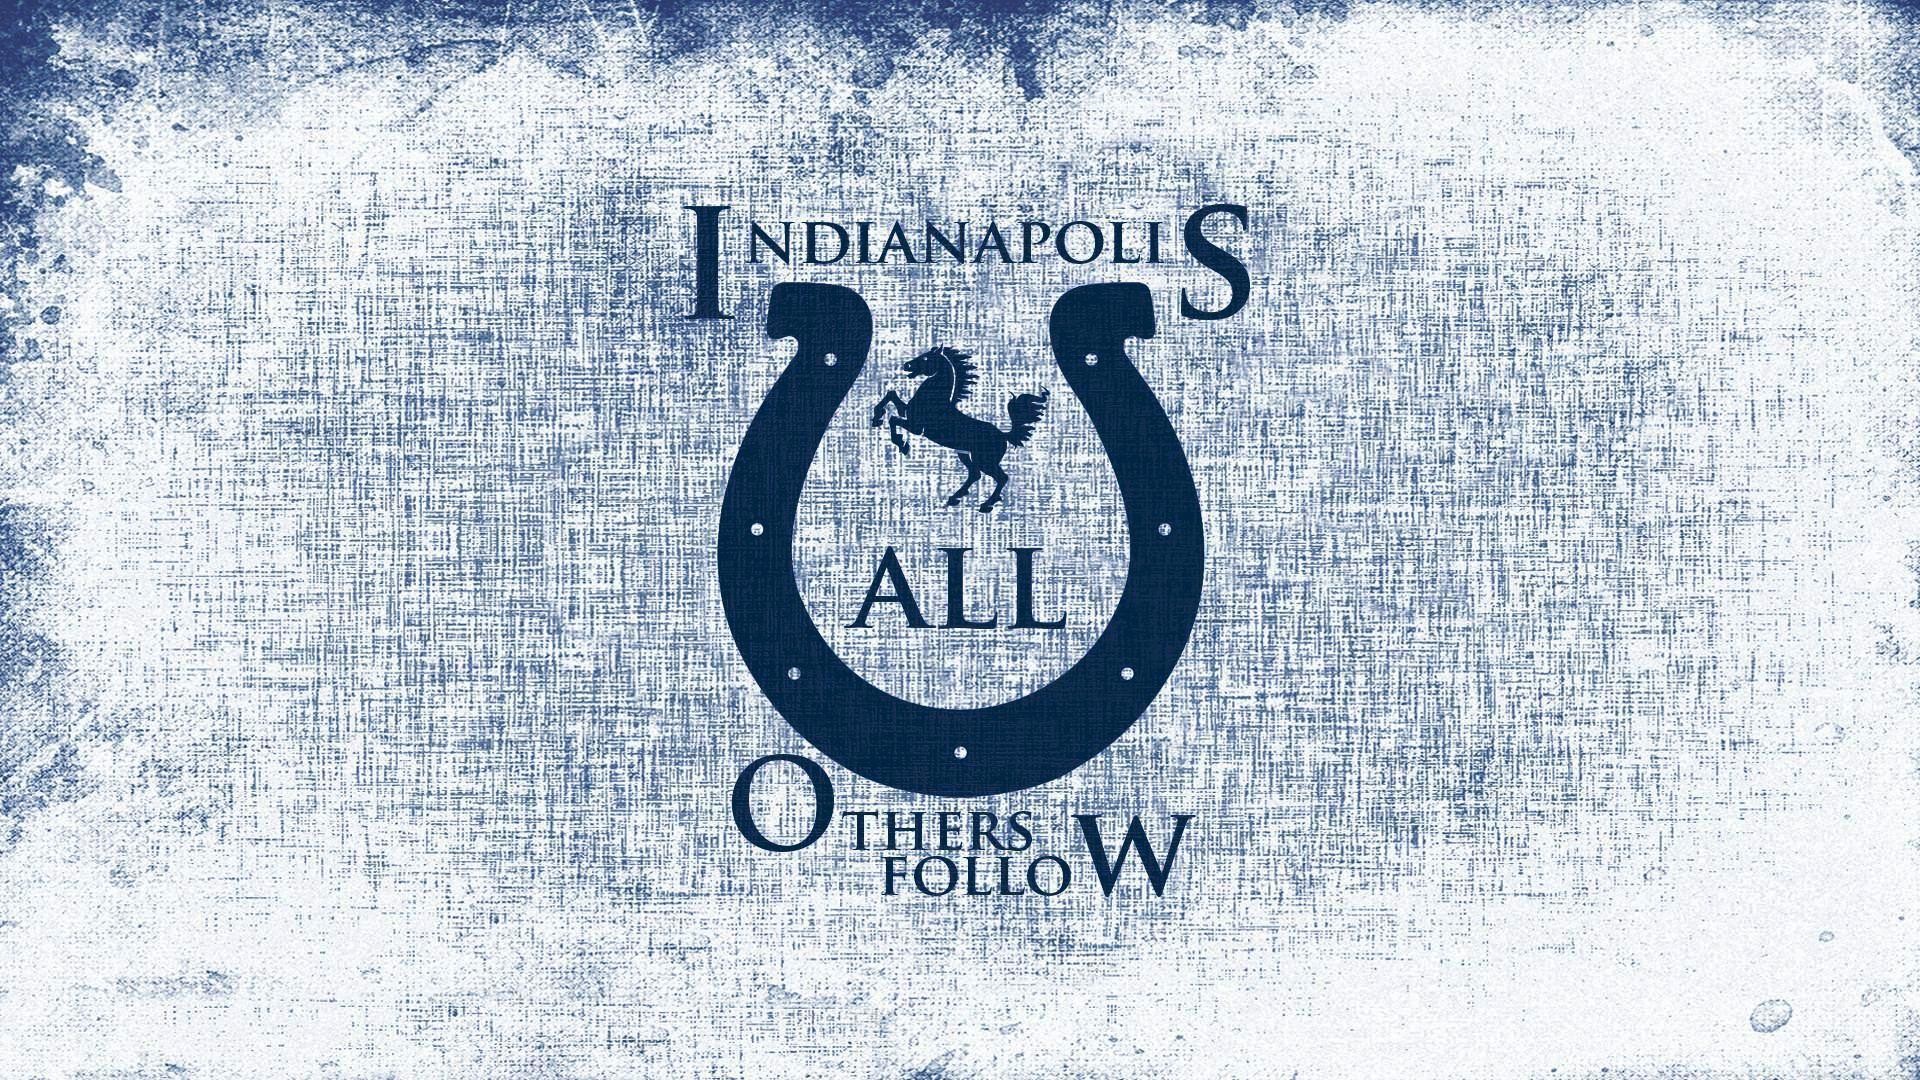 Indianapolis Colts Laptop Wallpaper With high-resolution 1920X1080 pixel. Download and set as wallpaper for Desktop Computer, Apple iPhone X, XS Max, XR, 8, 7, 6, SE, iPad, Android